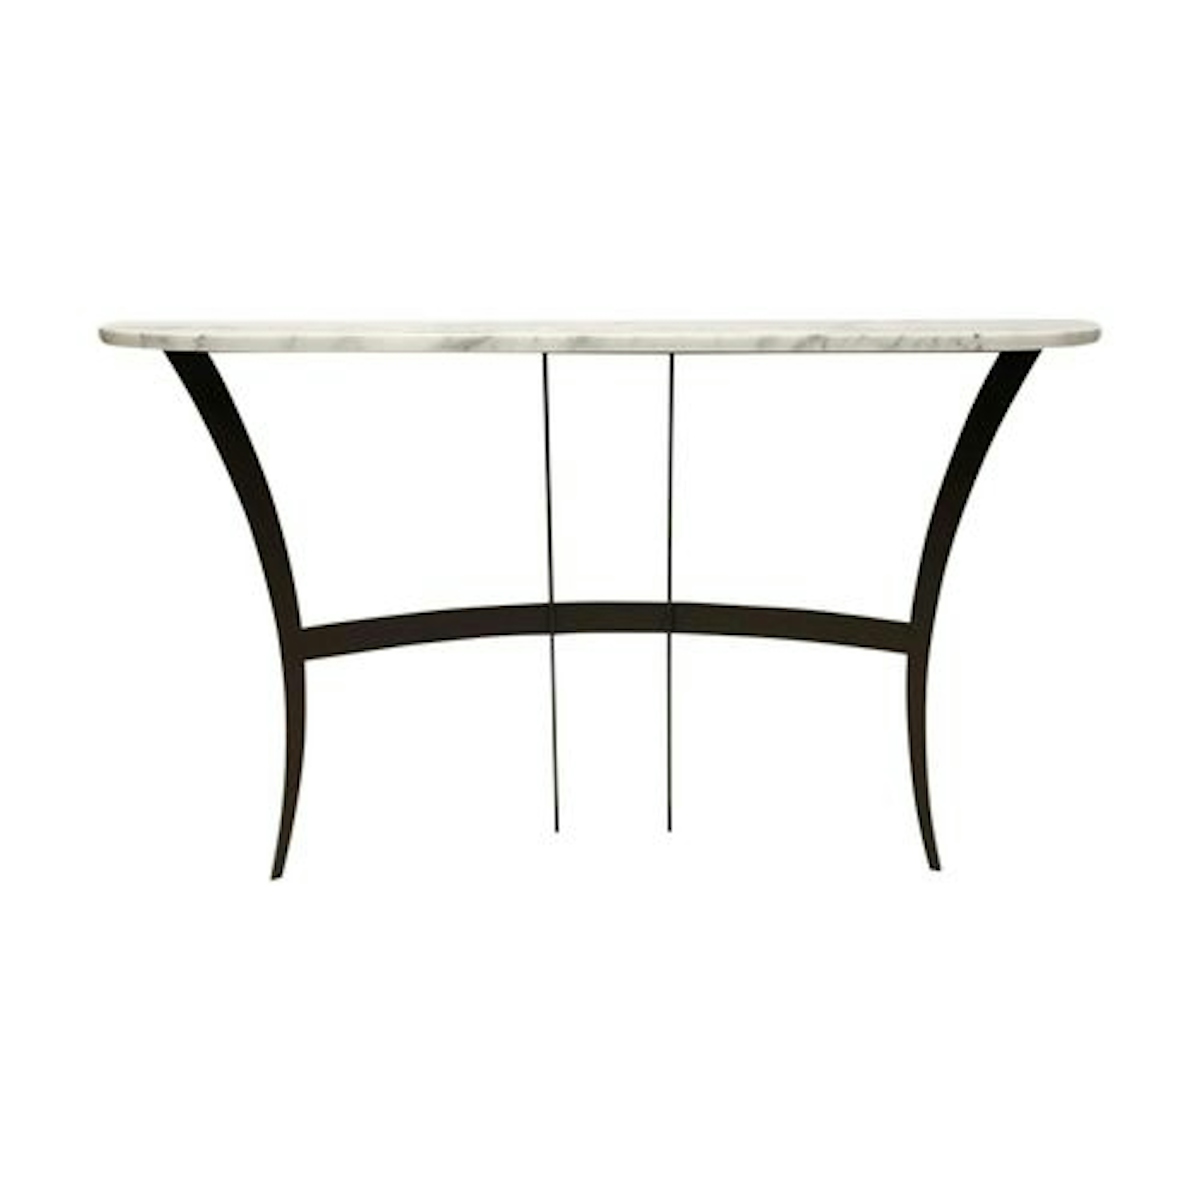 Contemporary marble console table | Shop console tables online at LuxDeco.com